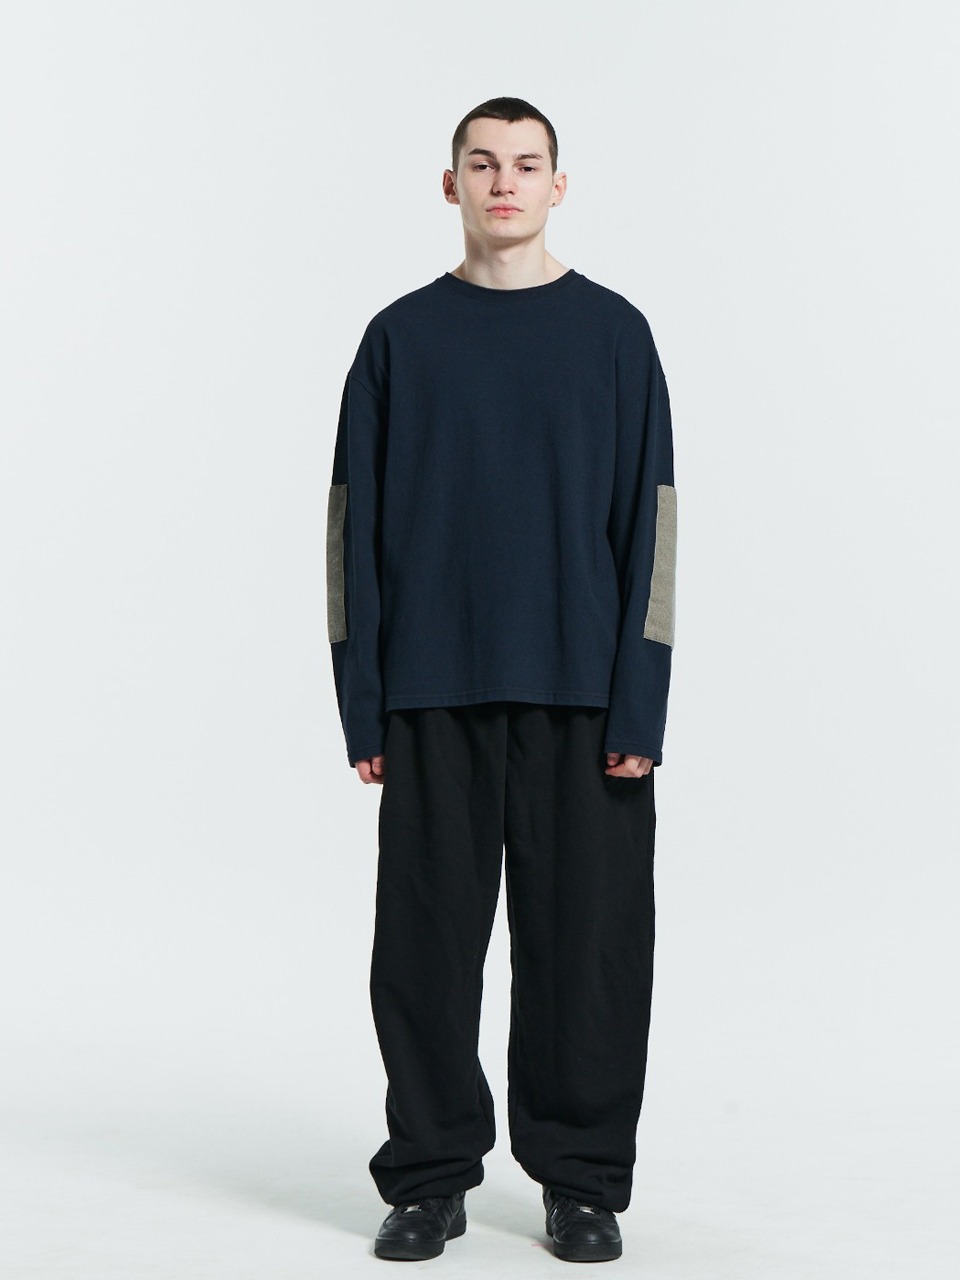 PLASTICPRODUCT - MPa PATCHED SLEEVE (NAVY)